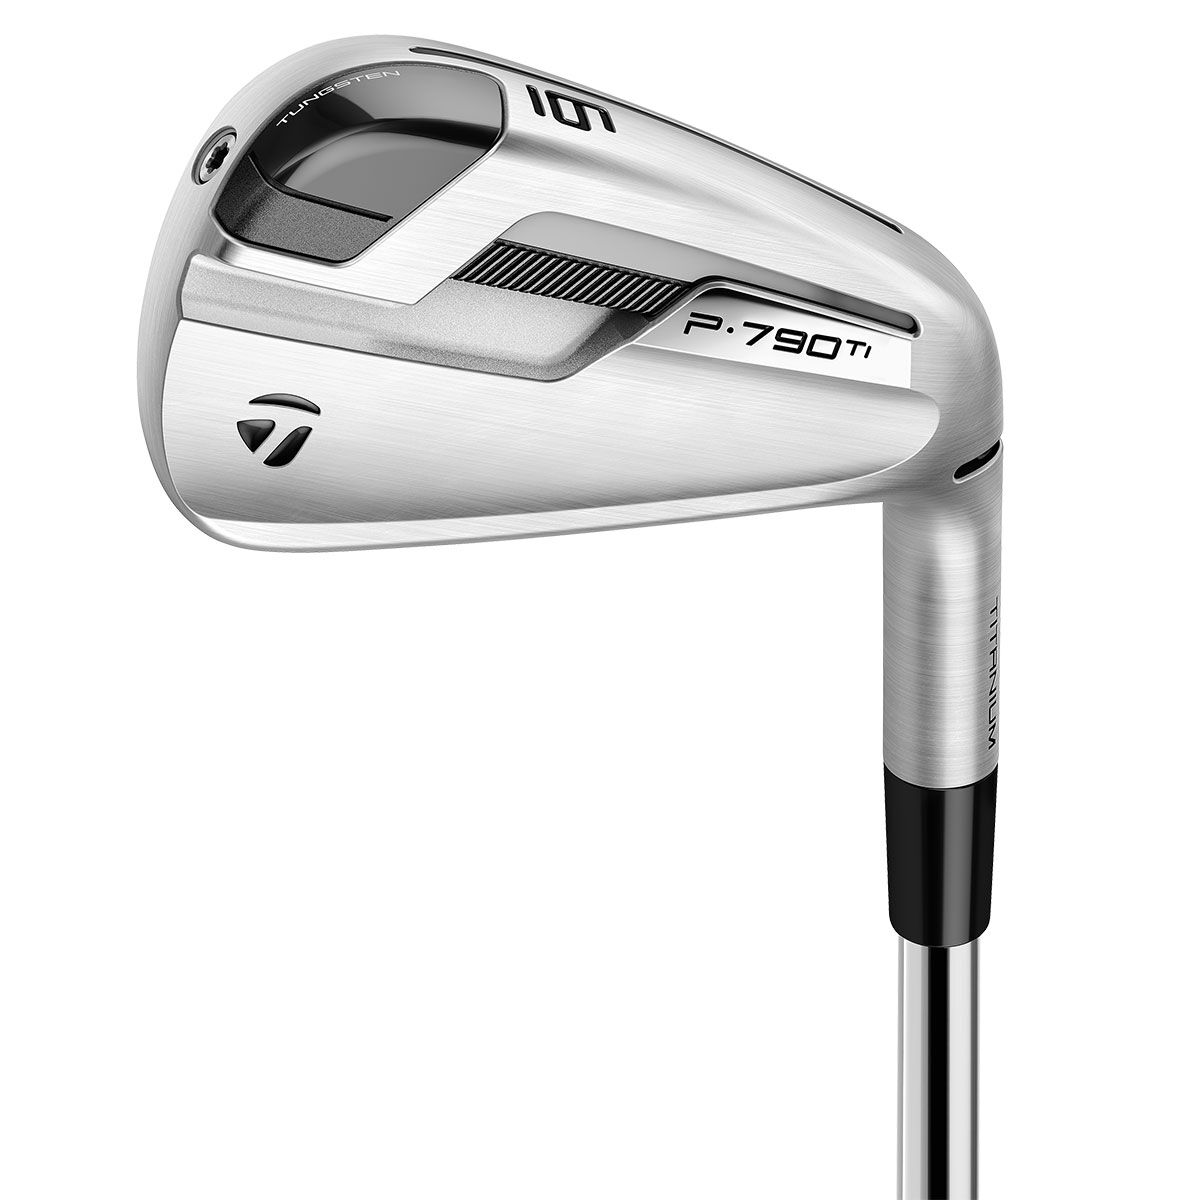 TaylorMade Golf Irons, Silver P790 Ti Graphite Regular Right Hand 6, Size: 5-PW | American Golf